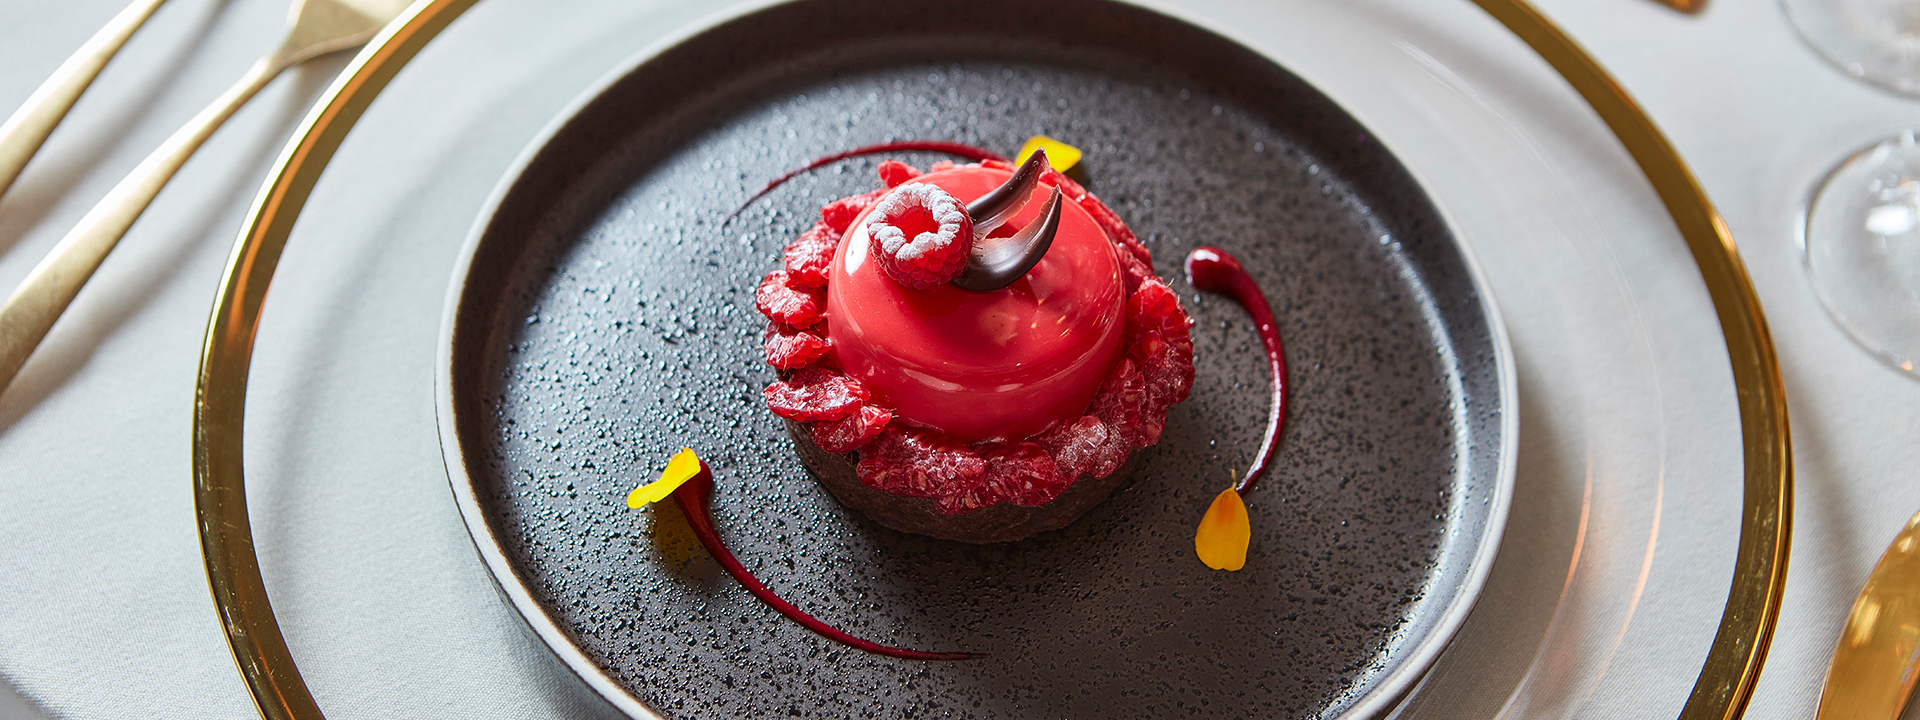 A raspberry tart from the private event menu at The Berkeley